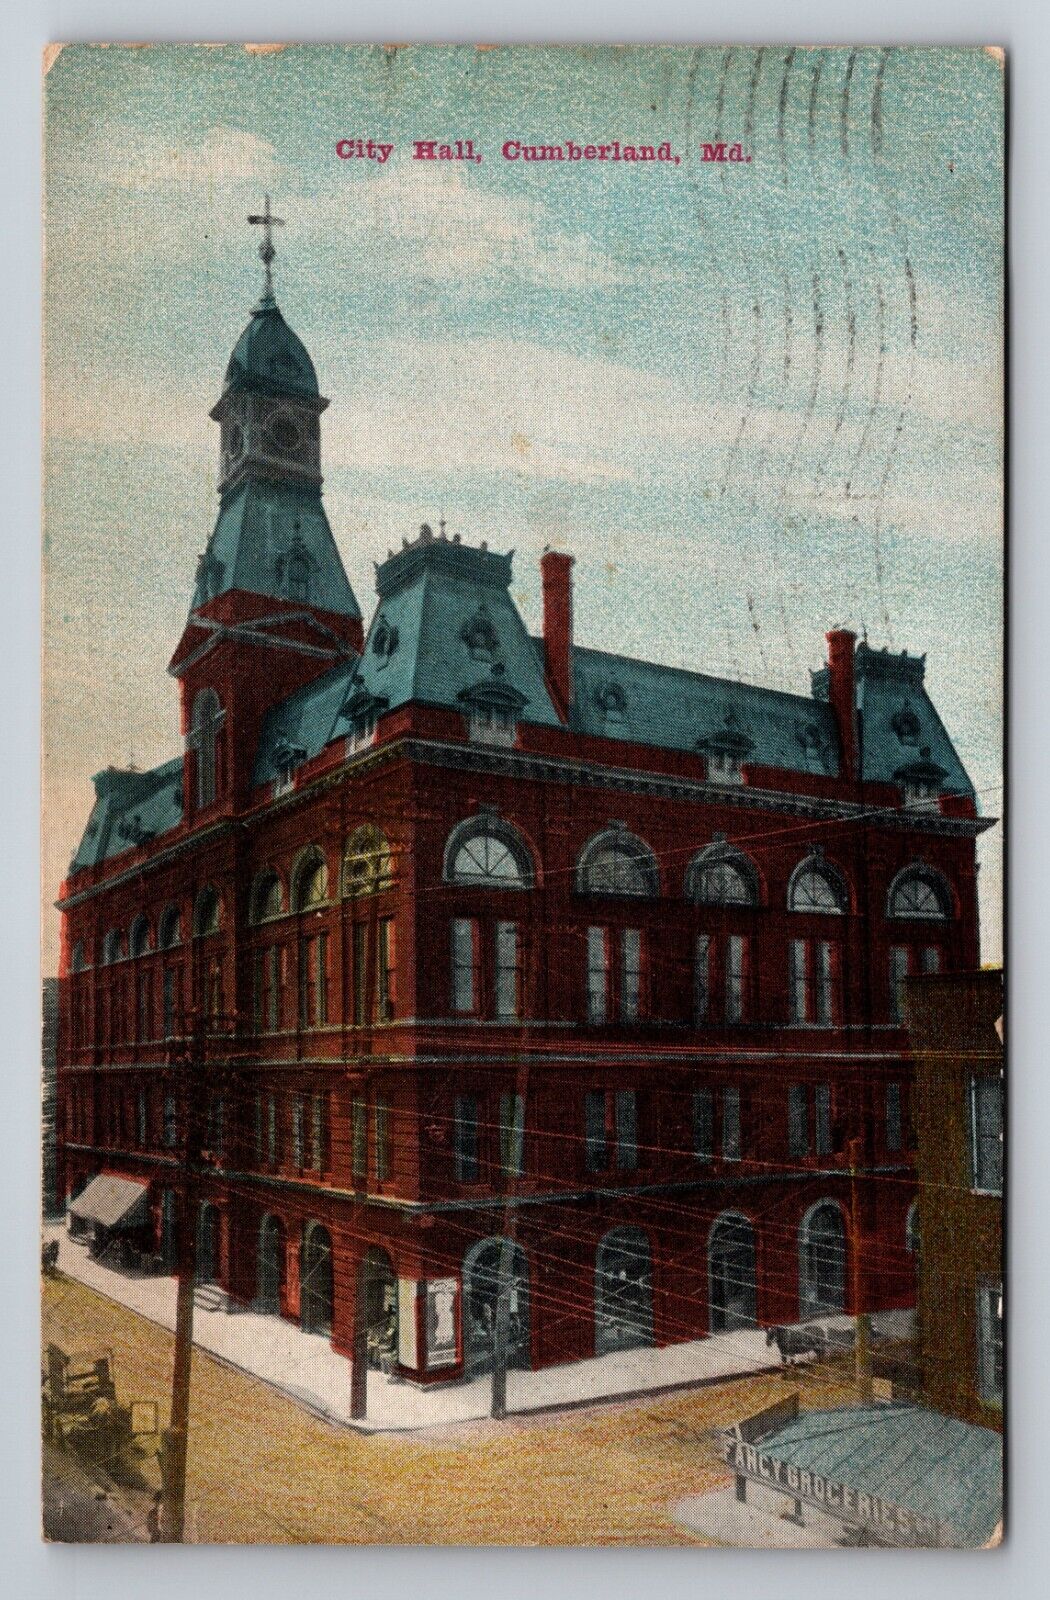 City Hall Cumberland Maryland Antique Posted 1910 Postcard